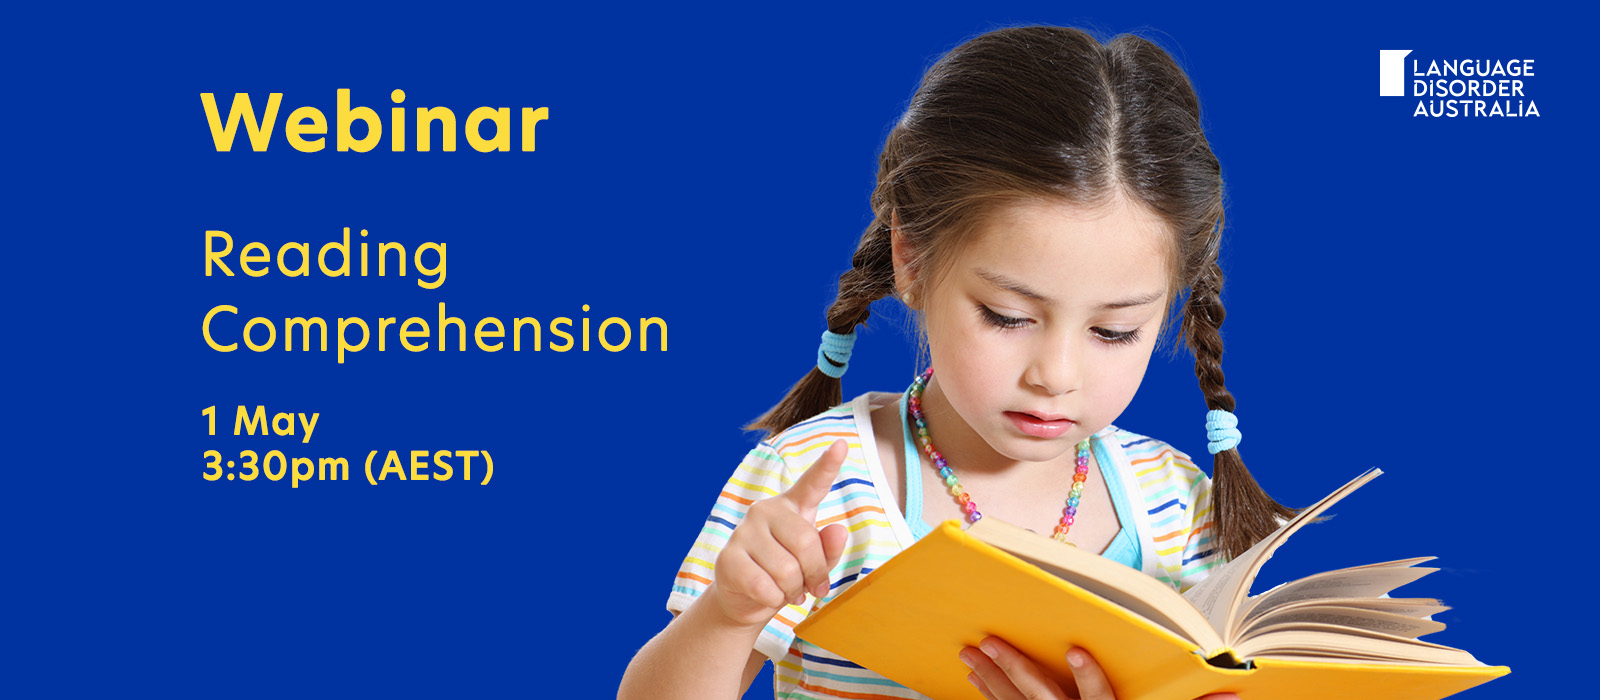 Webinar - Reading Comprehension - 1 May - 3:30pm (AEST)